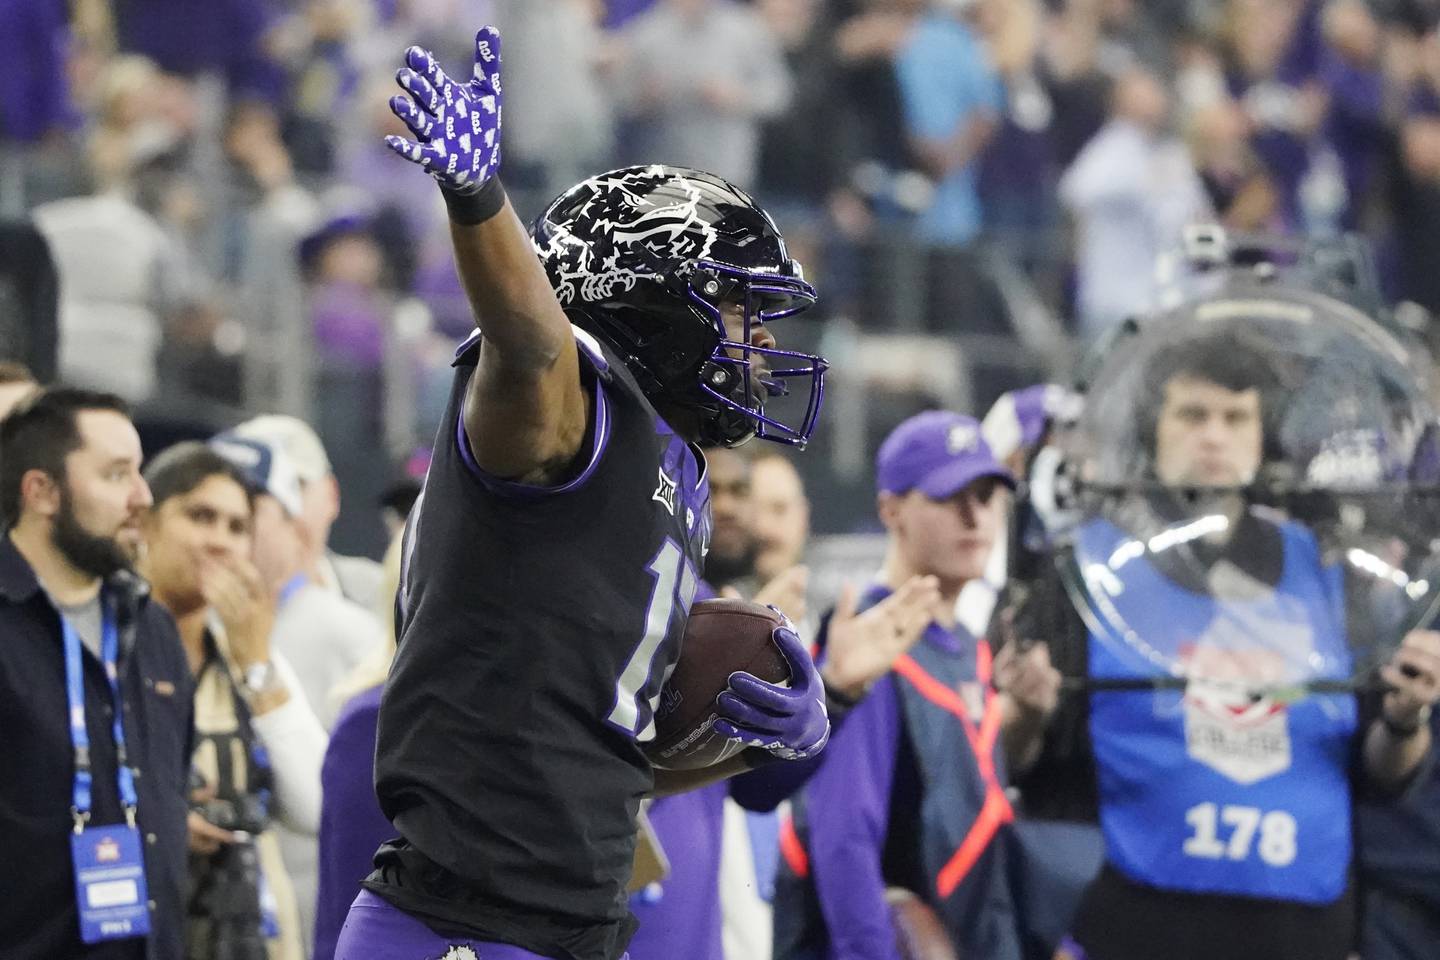 TCU wide receiver Quentin Johnston celebrates a catch for a first down in the second half of the Big 12 championship game against Kansas State on Dec. 3, 2022, in Arlington, Texas.